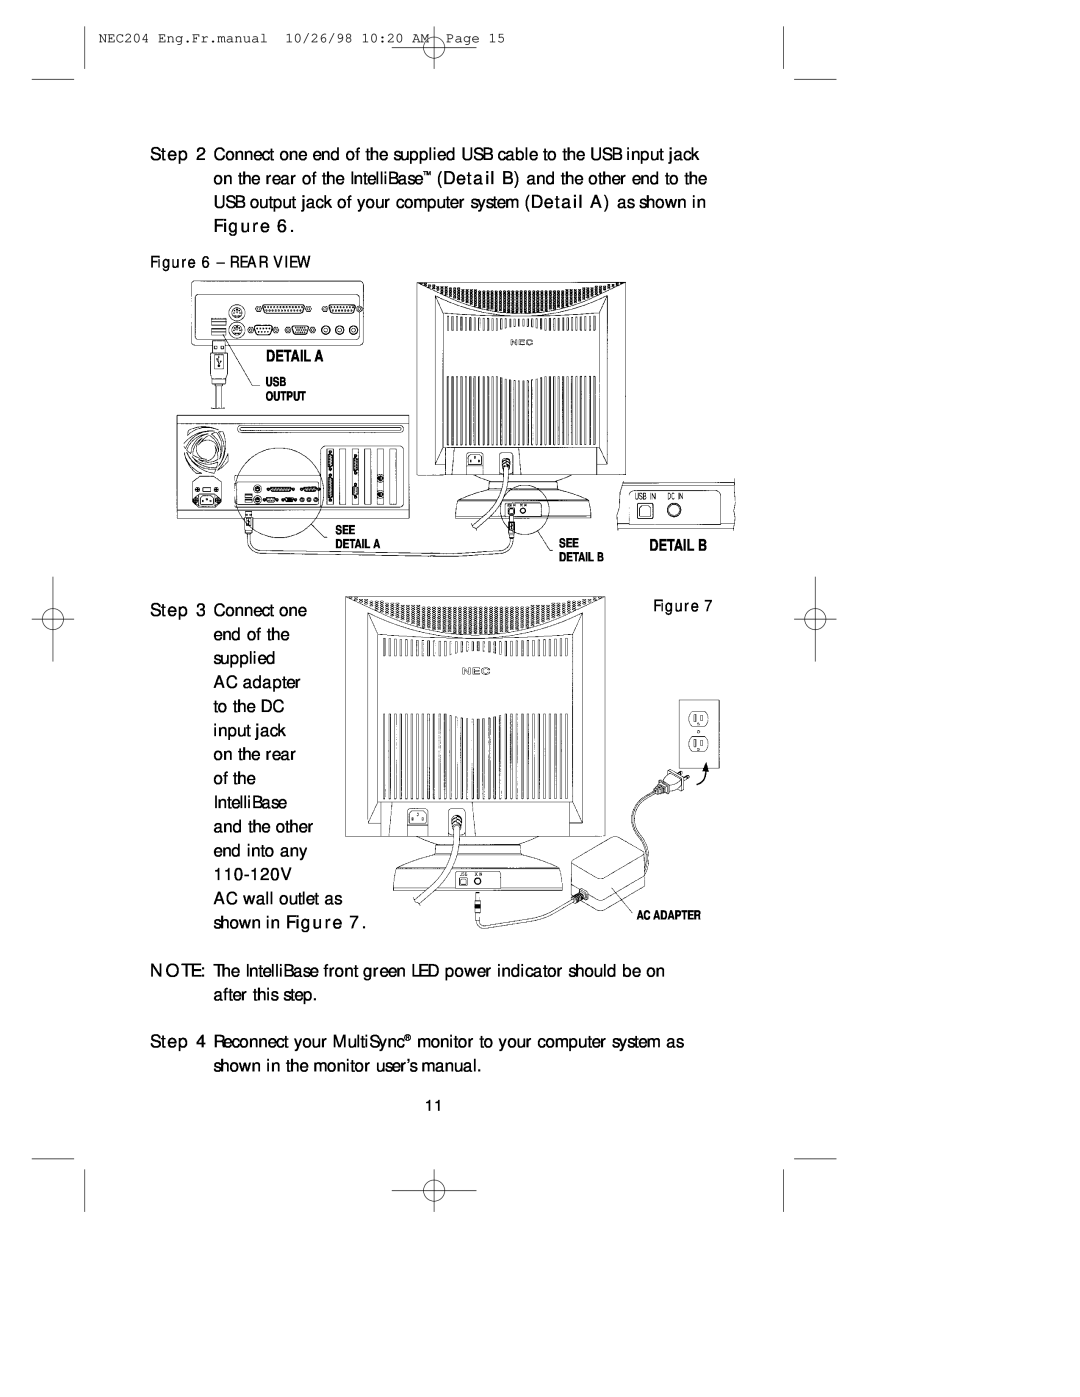 NEC A3844, IB-USB user manual AC wall outlet as shown in Figure 